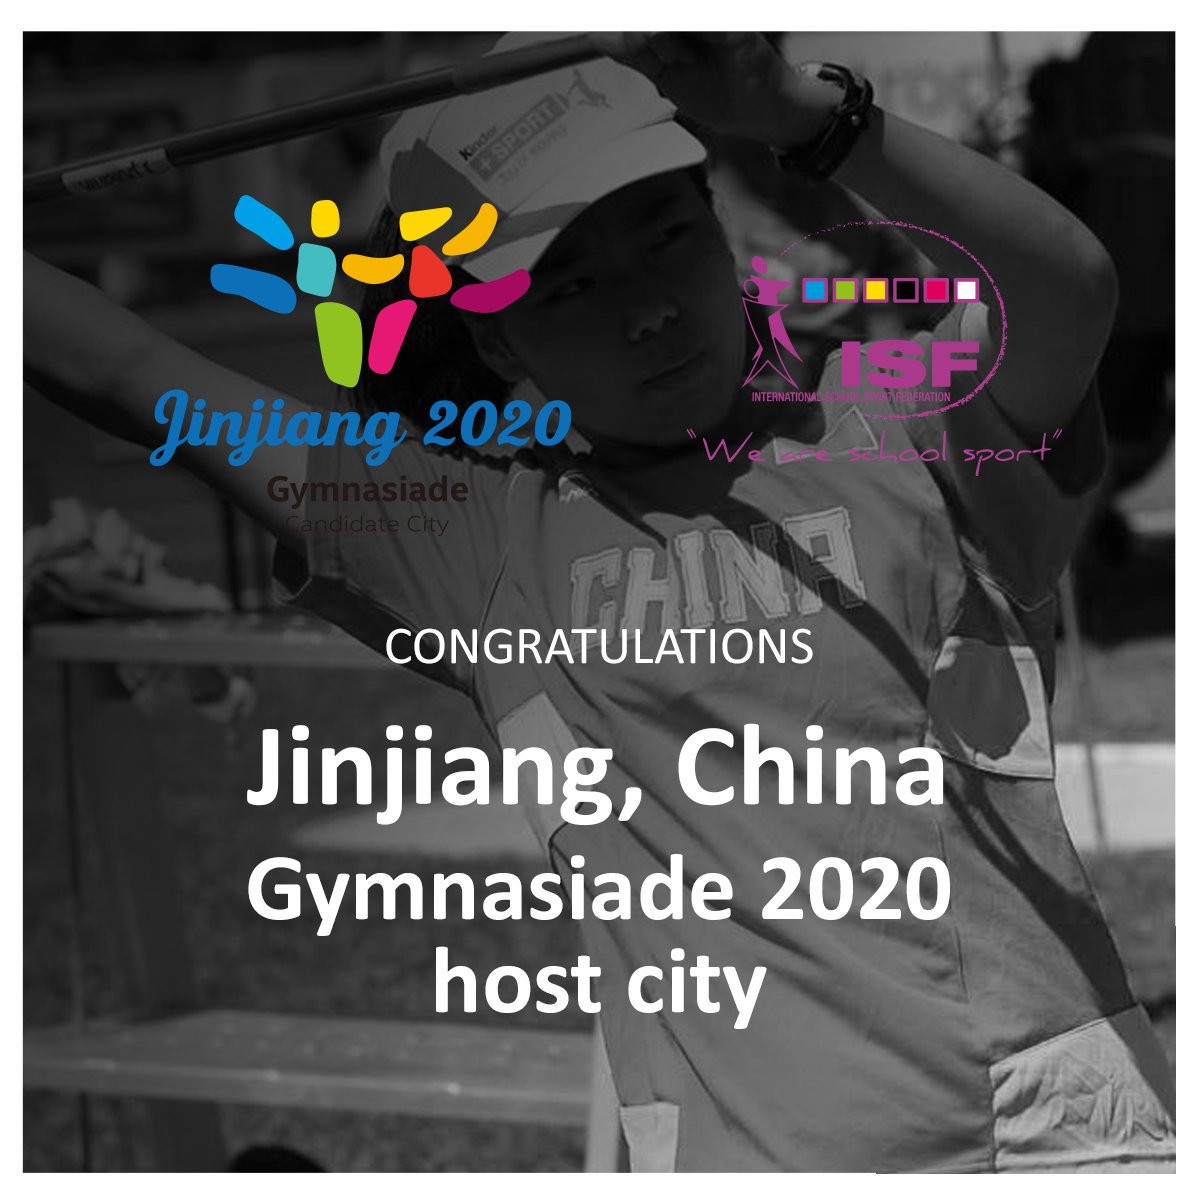 Jinjiang won the vote to host the 2020 ISF Gymnasiade ©ISF